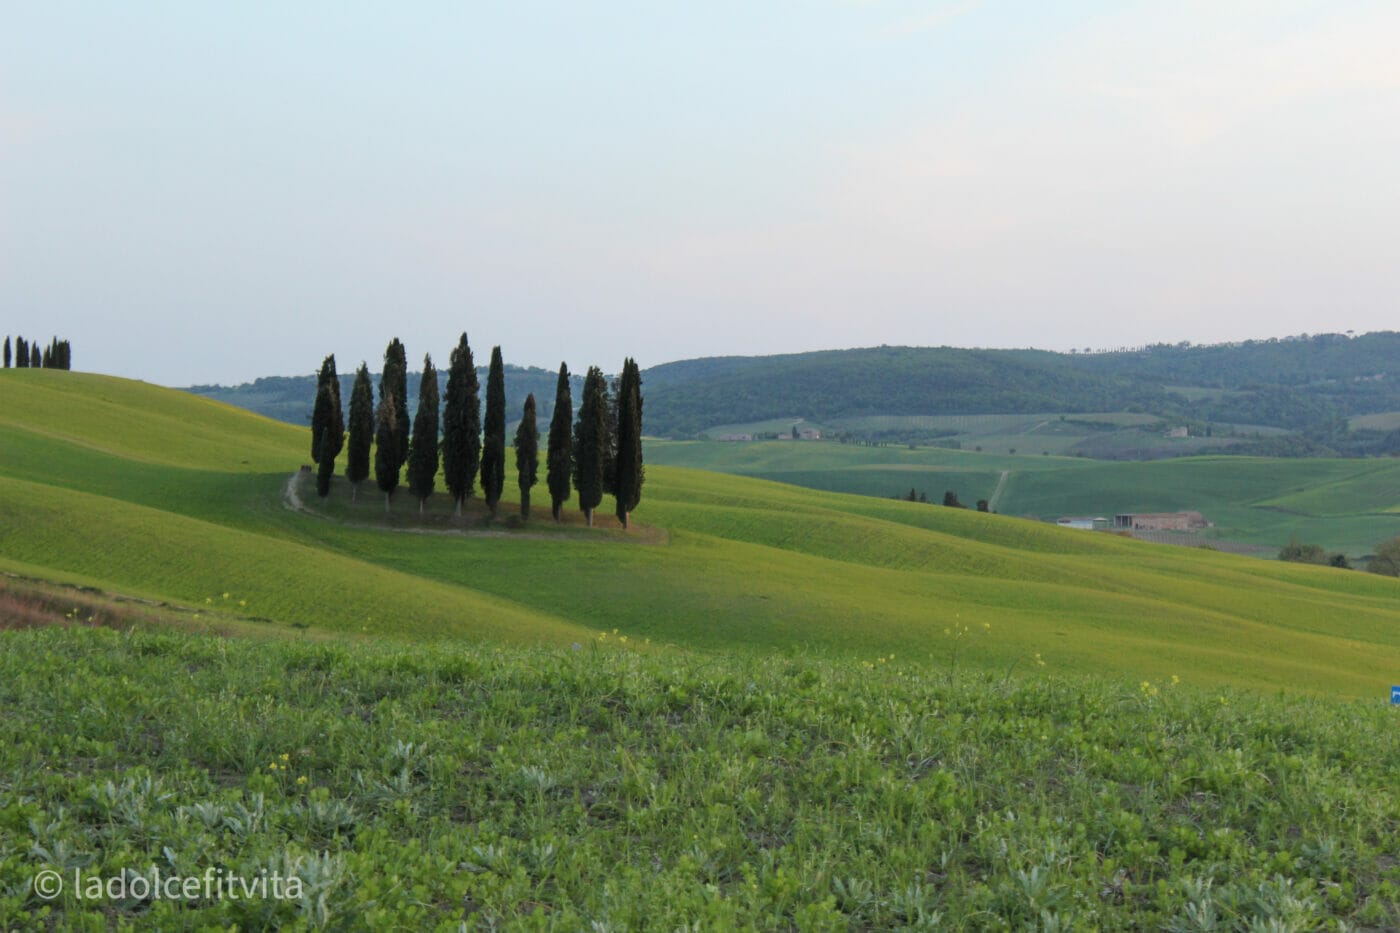 the beautiful cipressi di san quirico d'orcia (cypress tree grove) amongst the beautiful green rolling hills of tuscany